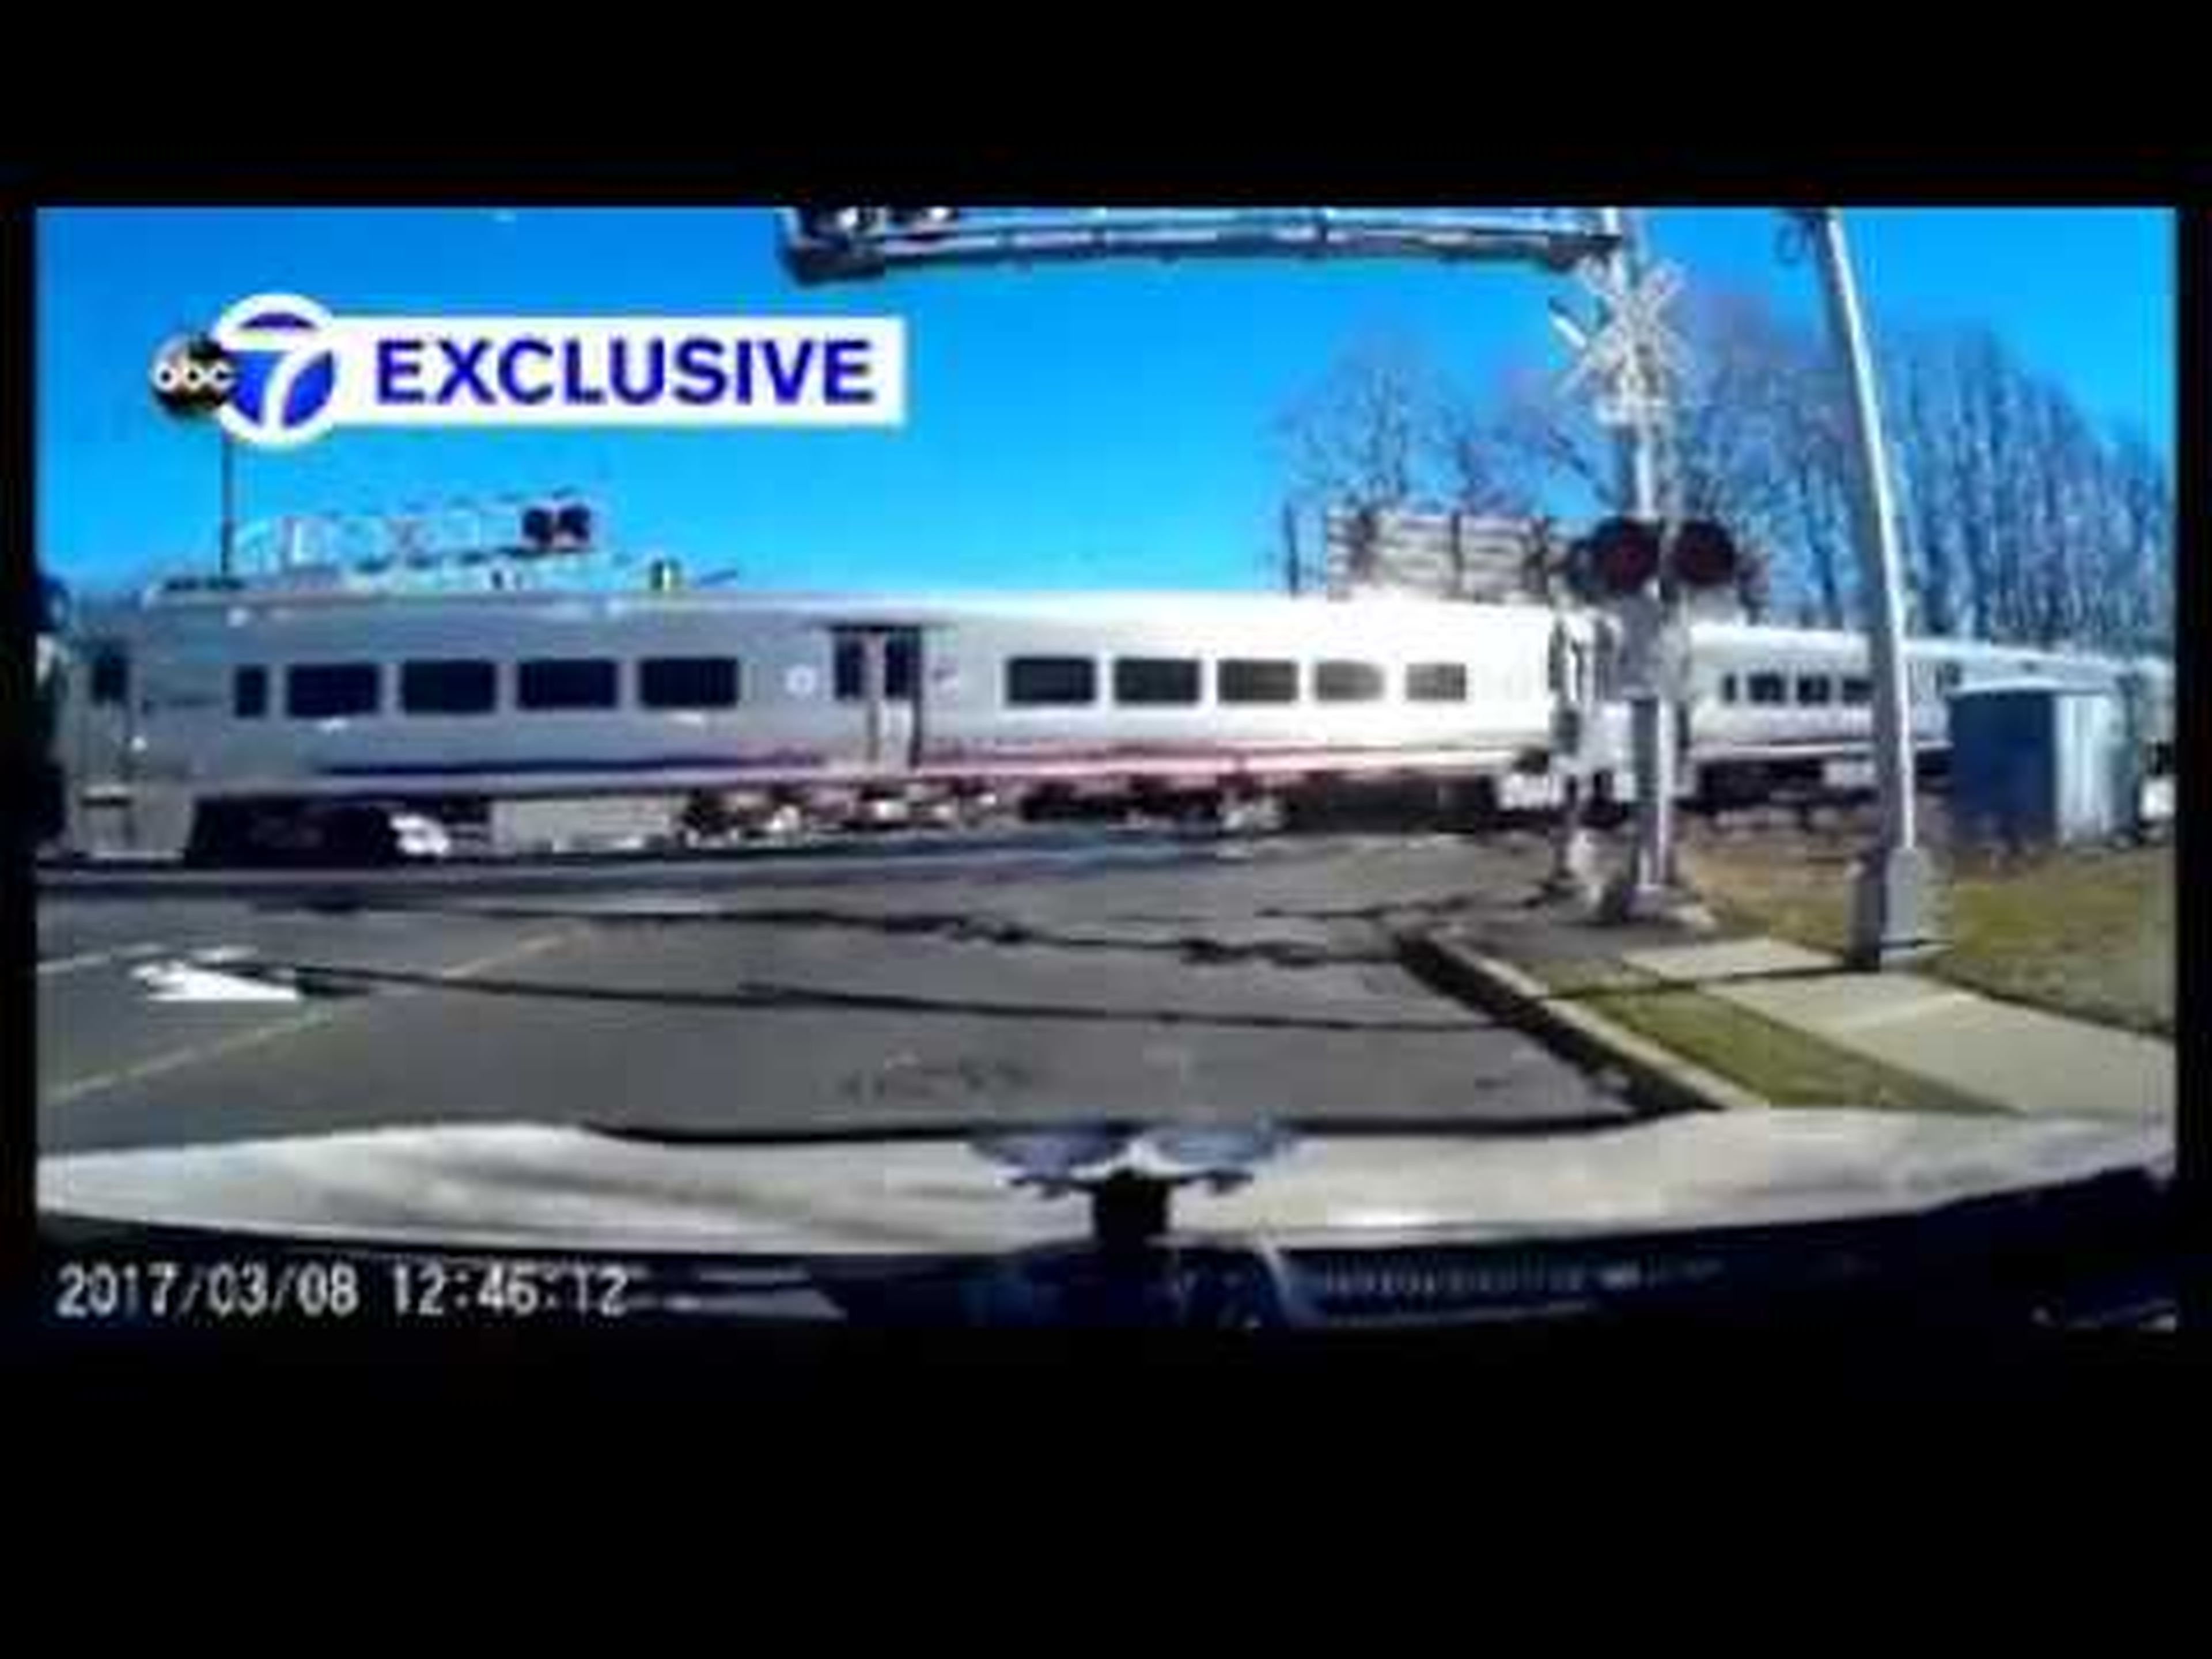 HERO! Driver leaps from car to save elderly woman crossing in front of train